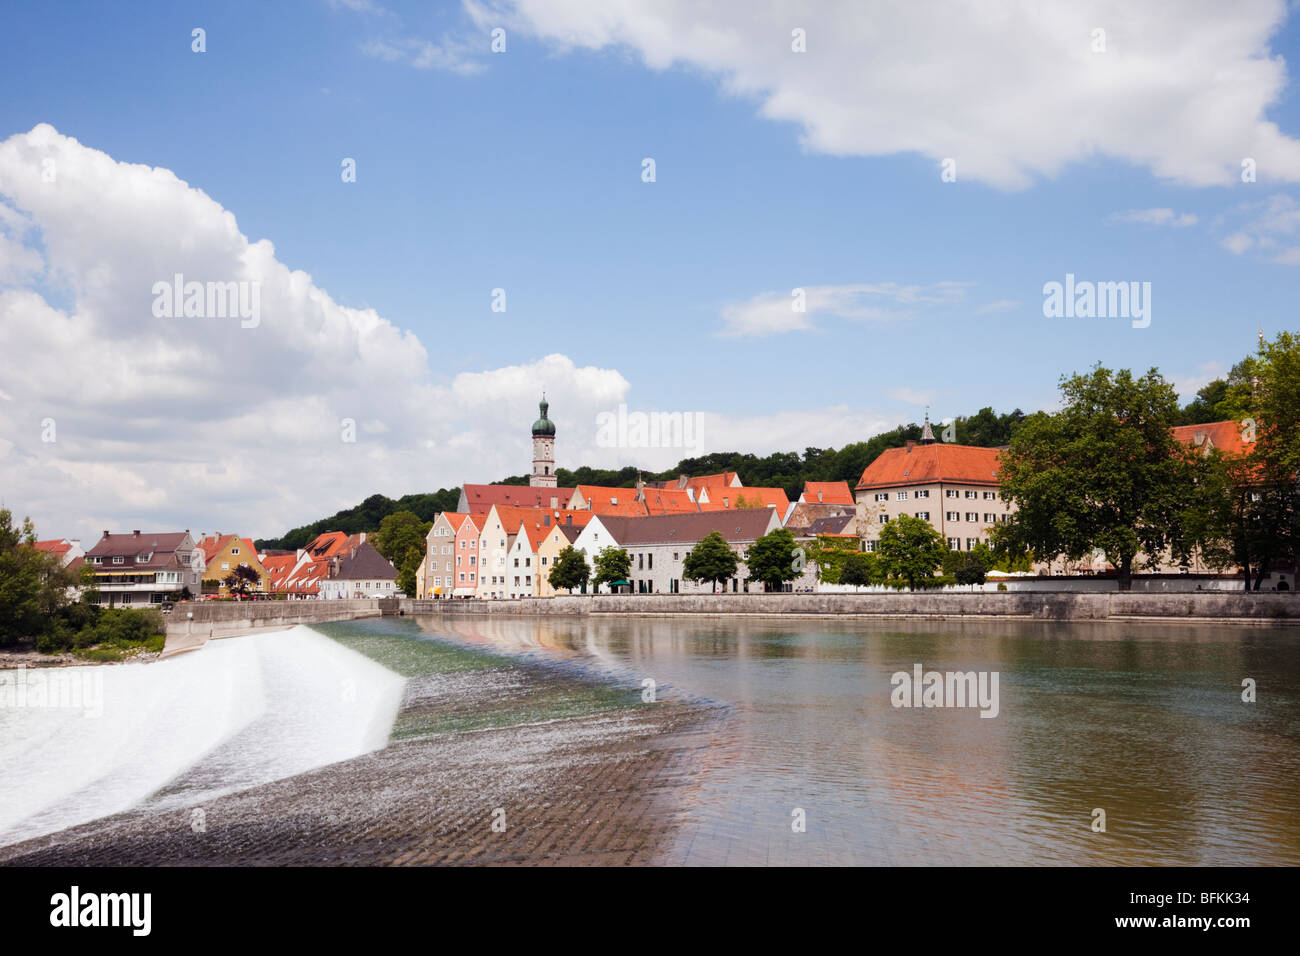 Landsberg am Lech, Bavaria, Germany, EU. View across the weir in the River Lech to medieval town on the Romantic Route road Stock Photo